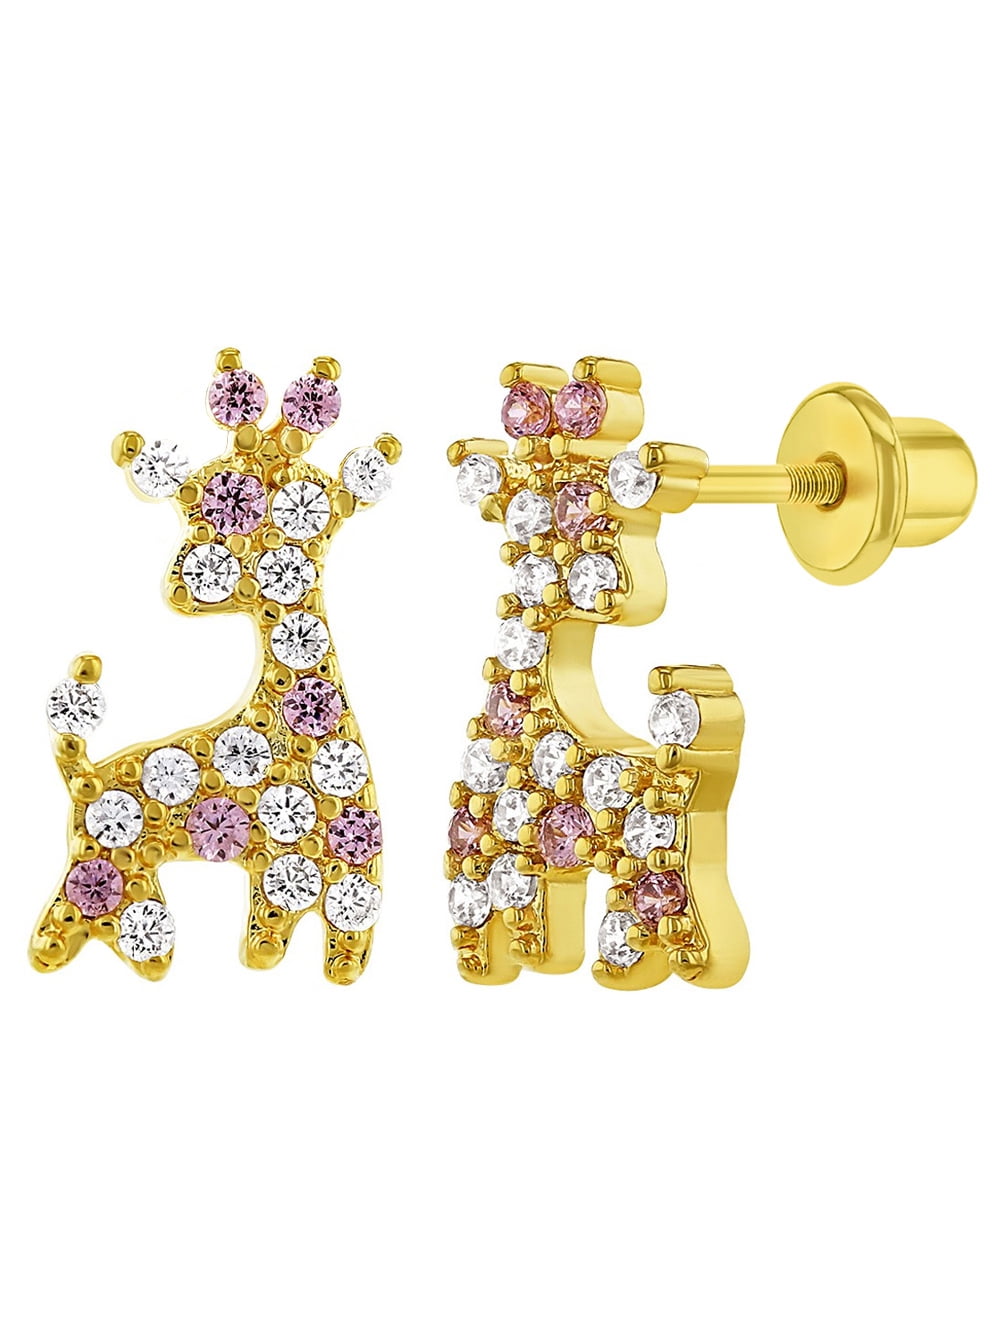 Details about   18k Gold Plated Fuchsia Green Crystal Cherries Screw Back Girls Earrings 